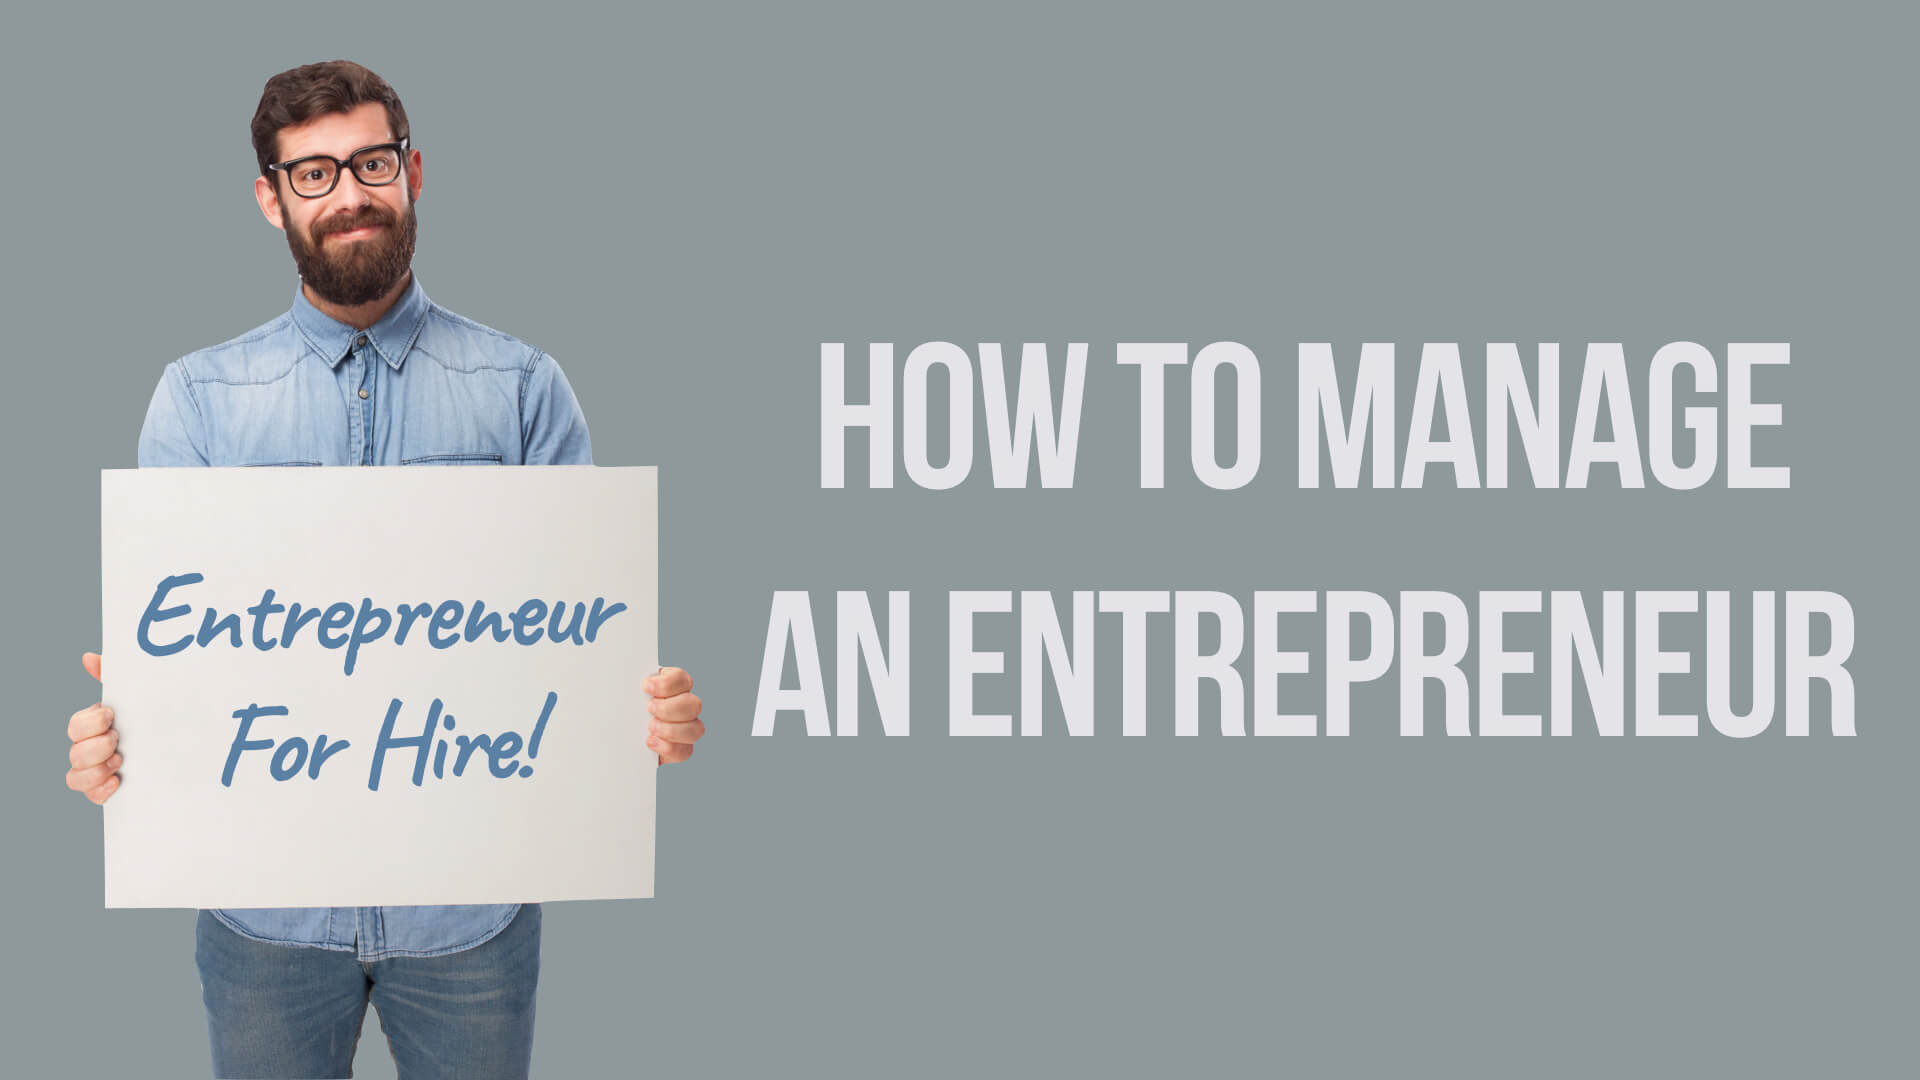 Man holding sign saying "entrepreneur for hire" with graphic title of "How to manage an entrepreneur"